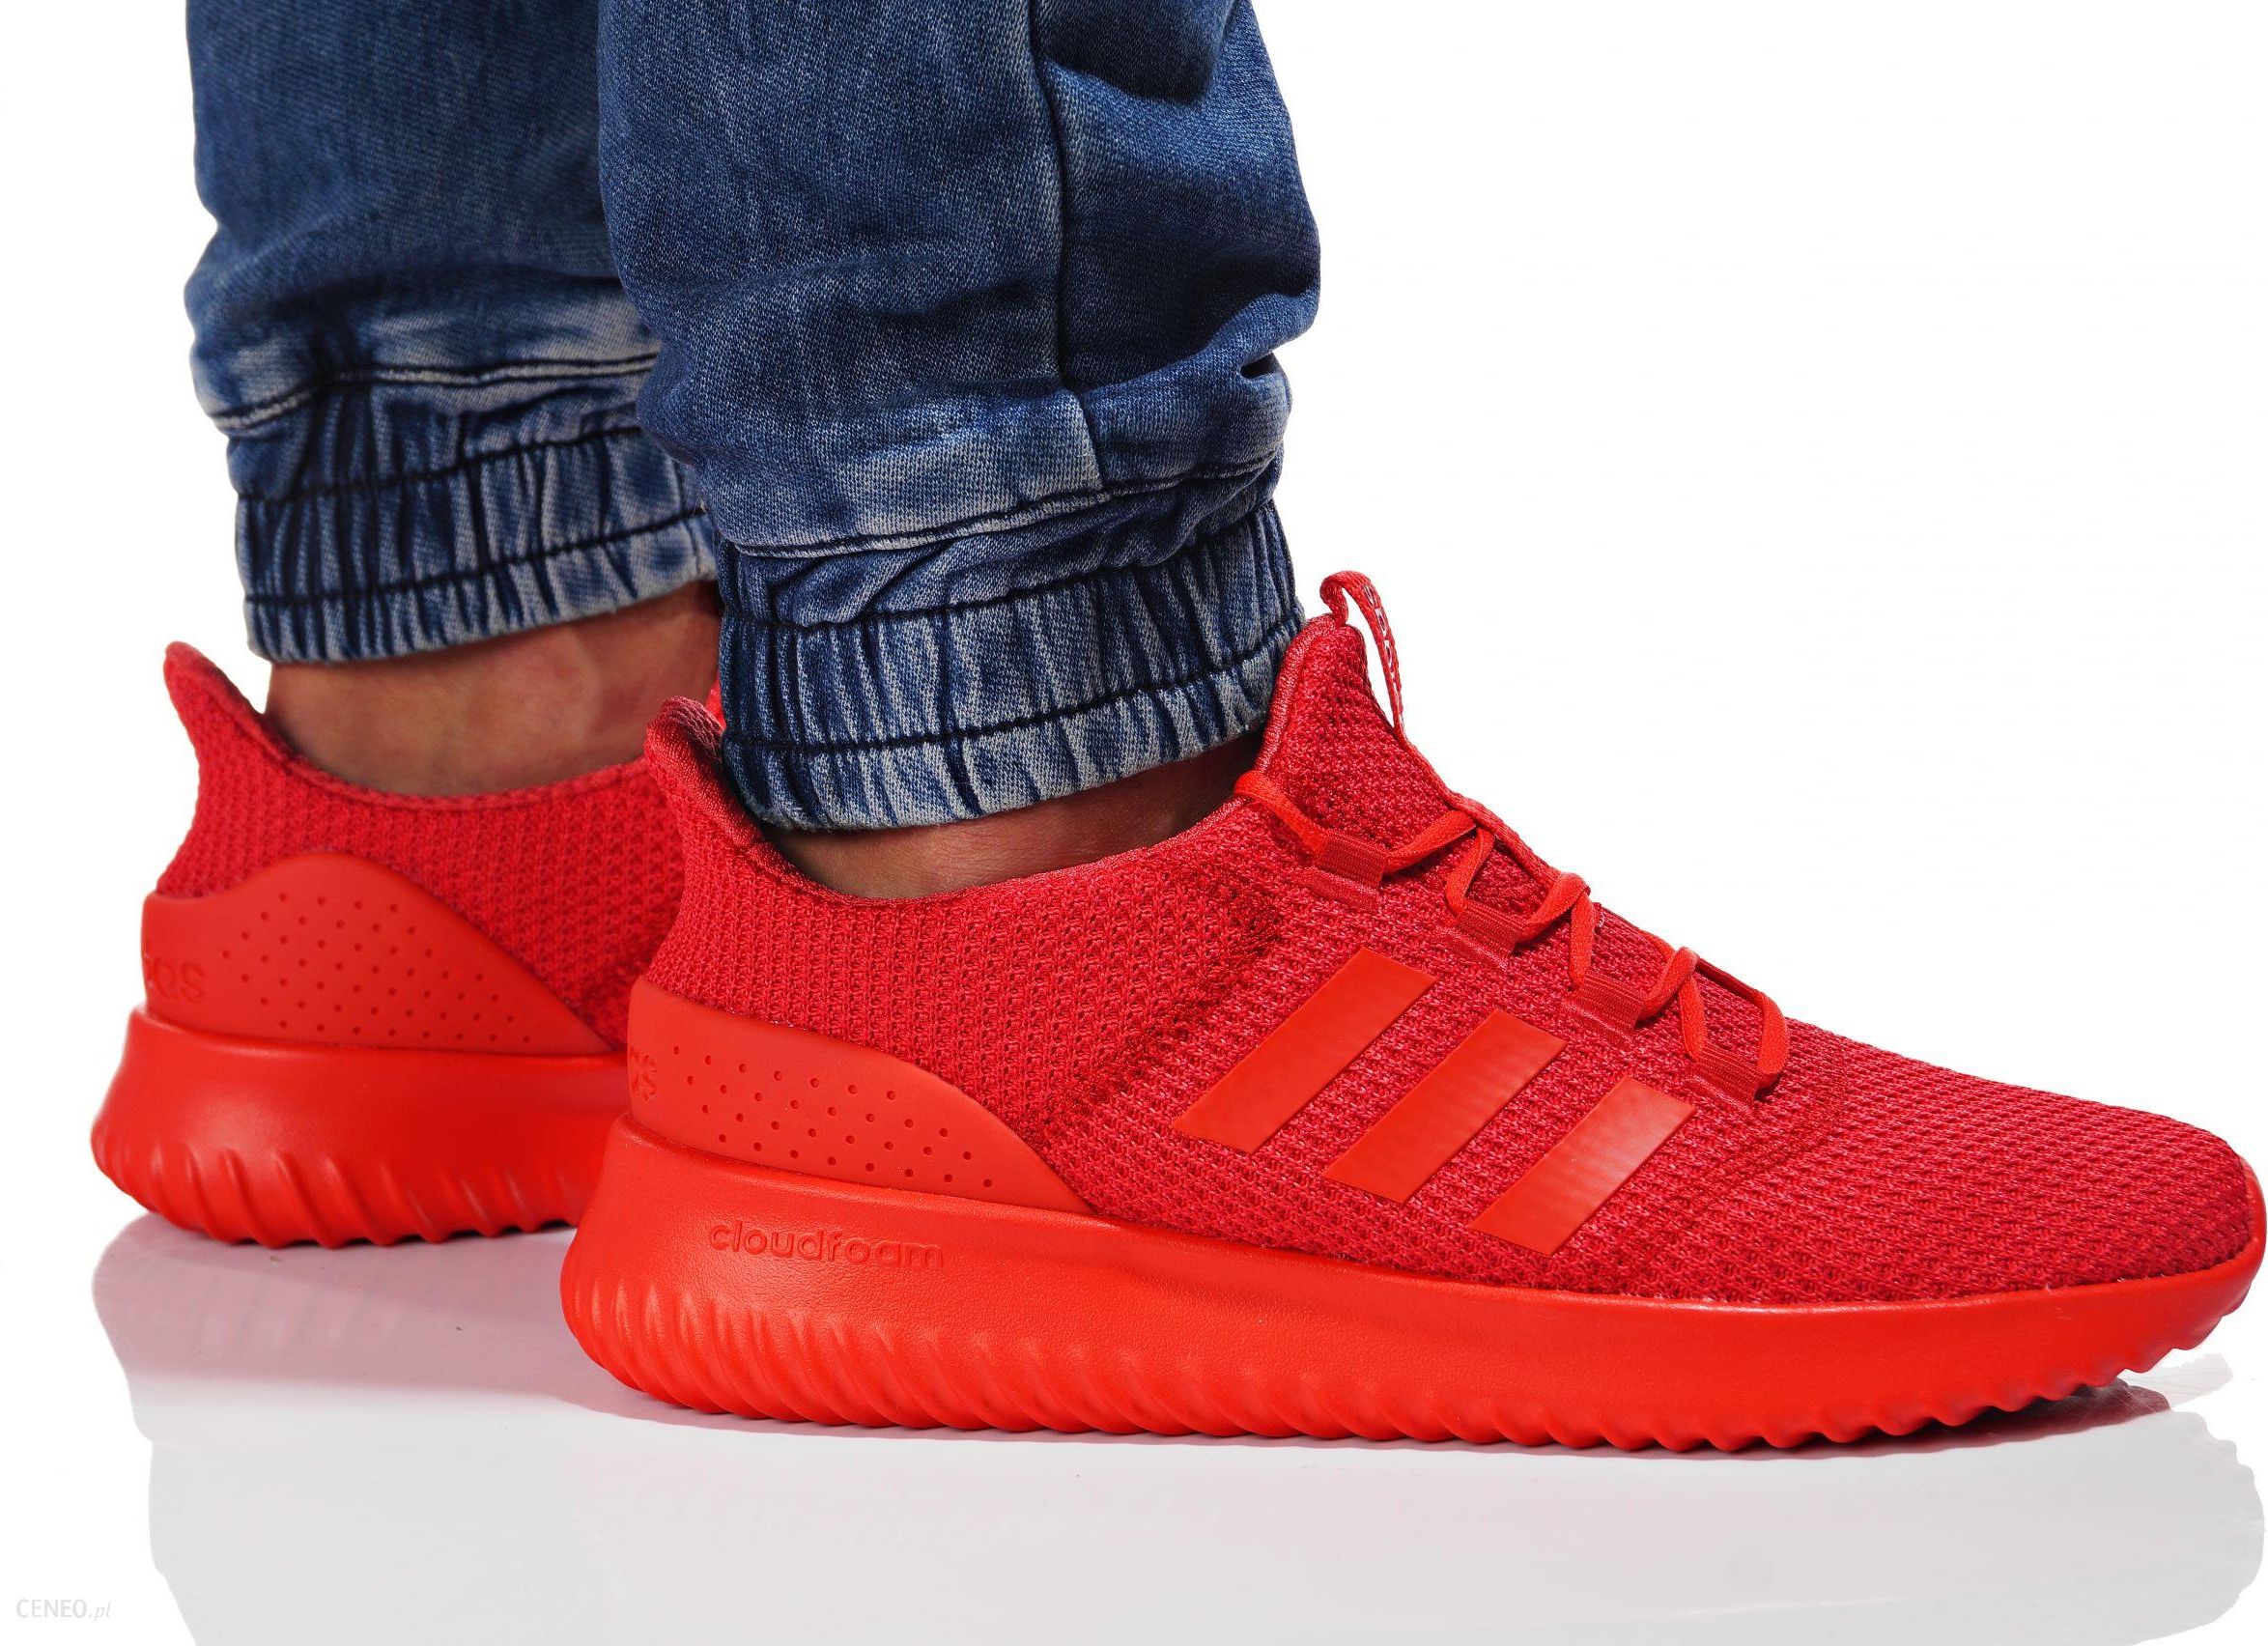 Buy cheap adidas cloudfoam ultimate red 